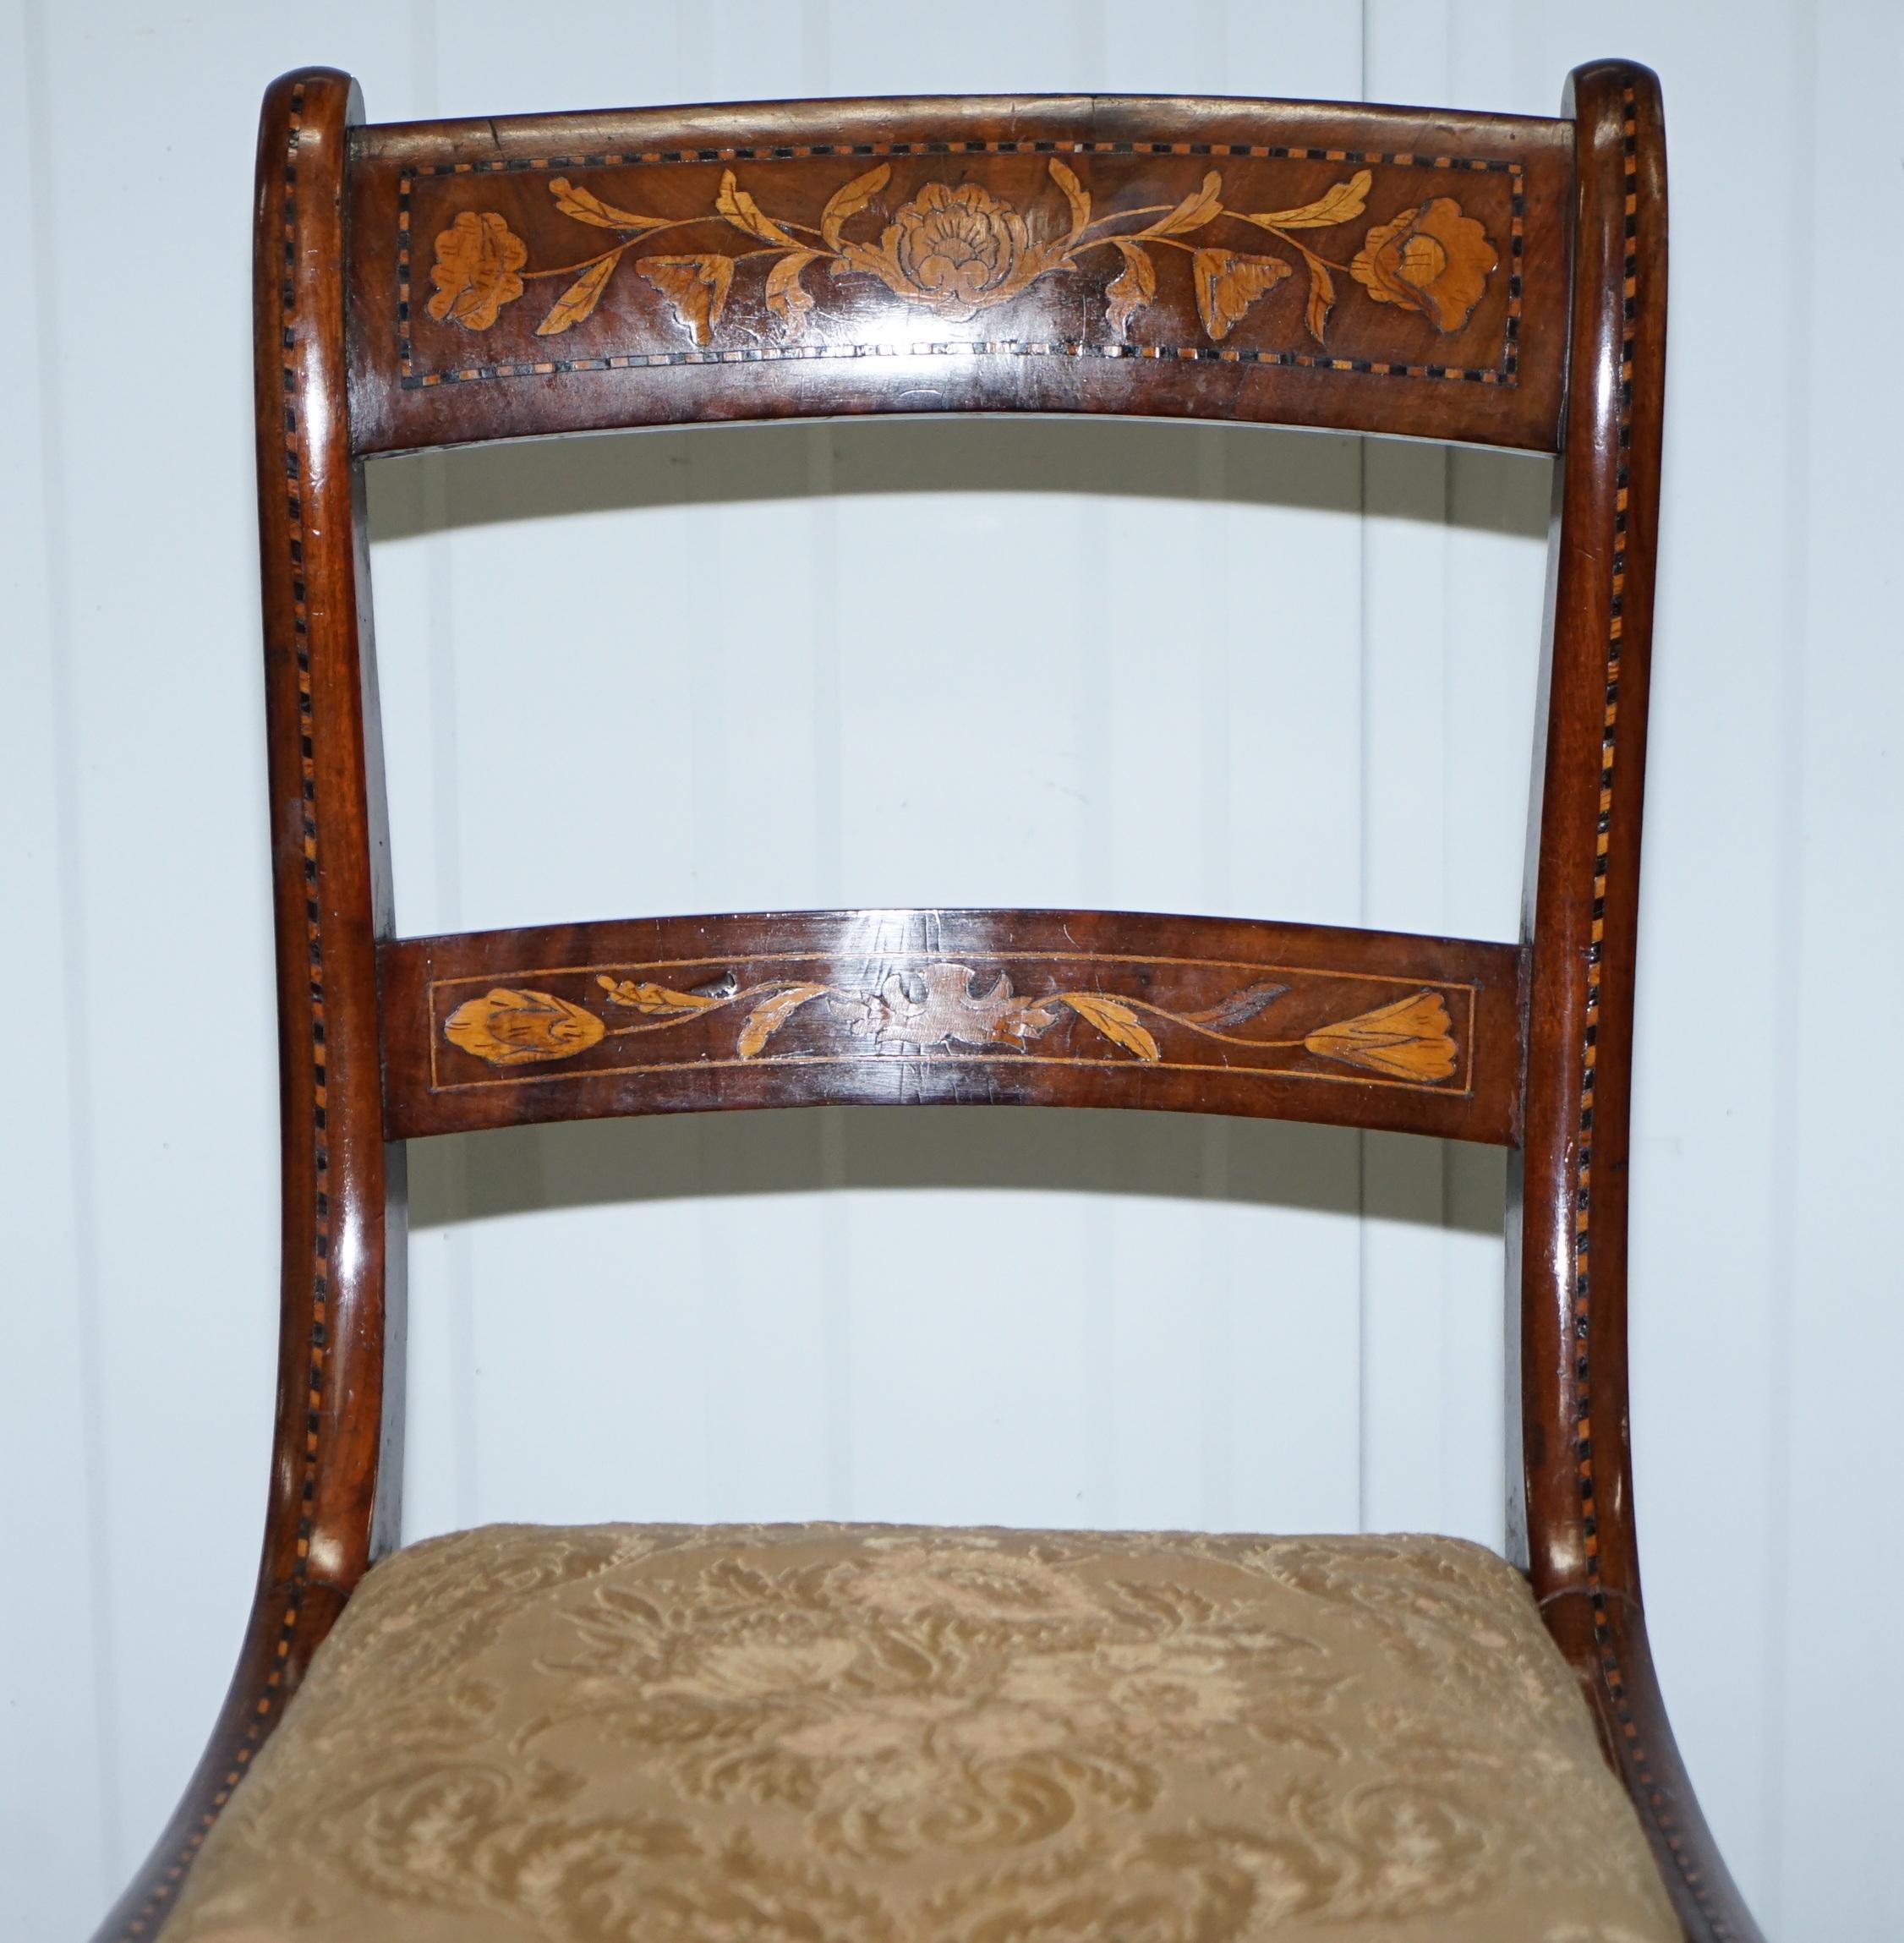 Inlay Pair of Regency circa 1810 Satinwood Dutch Marquetry Ornate Inlaid Side Chairs